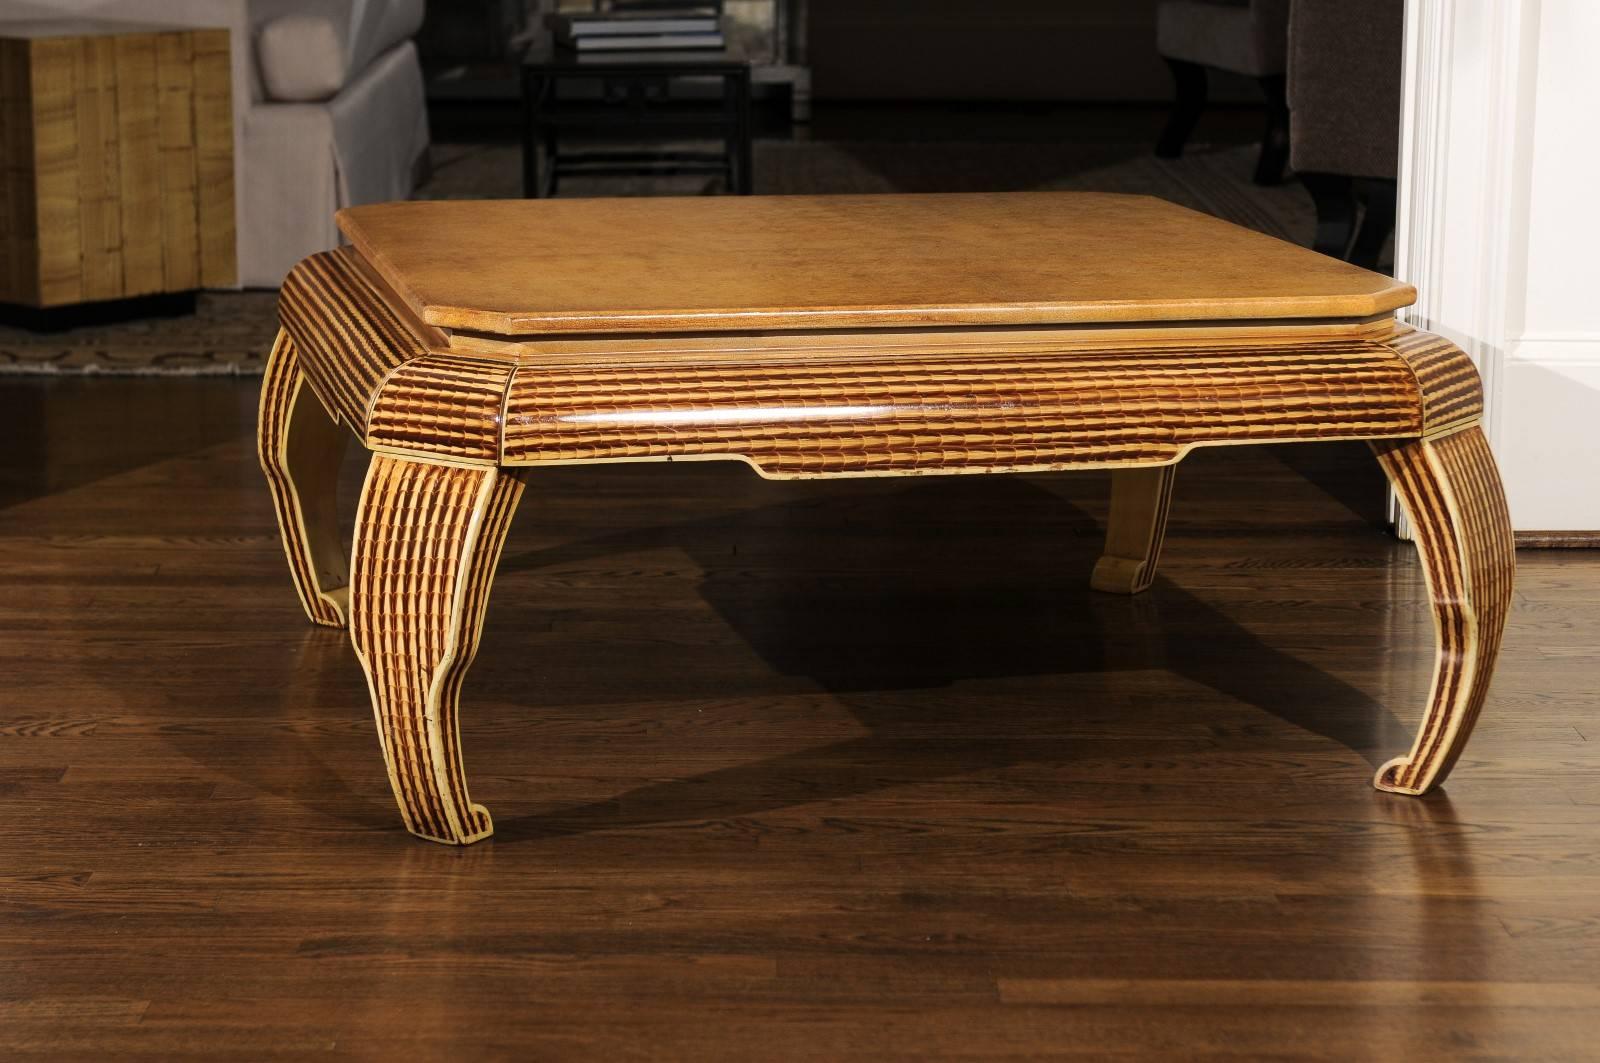 Exquisite Hand-Painted Coffee Table by Alessandro for Baker, circa 1985 In Excellent Condition For Sale In Atlanta, GA